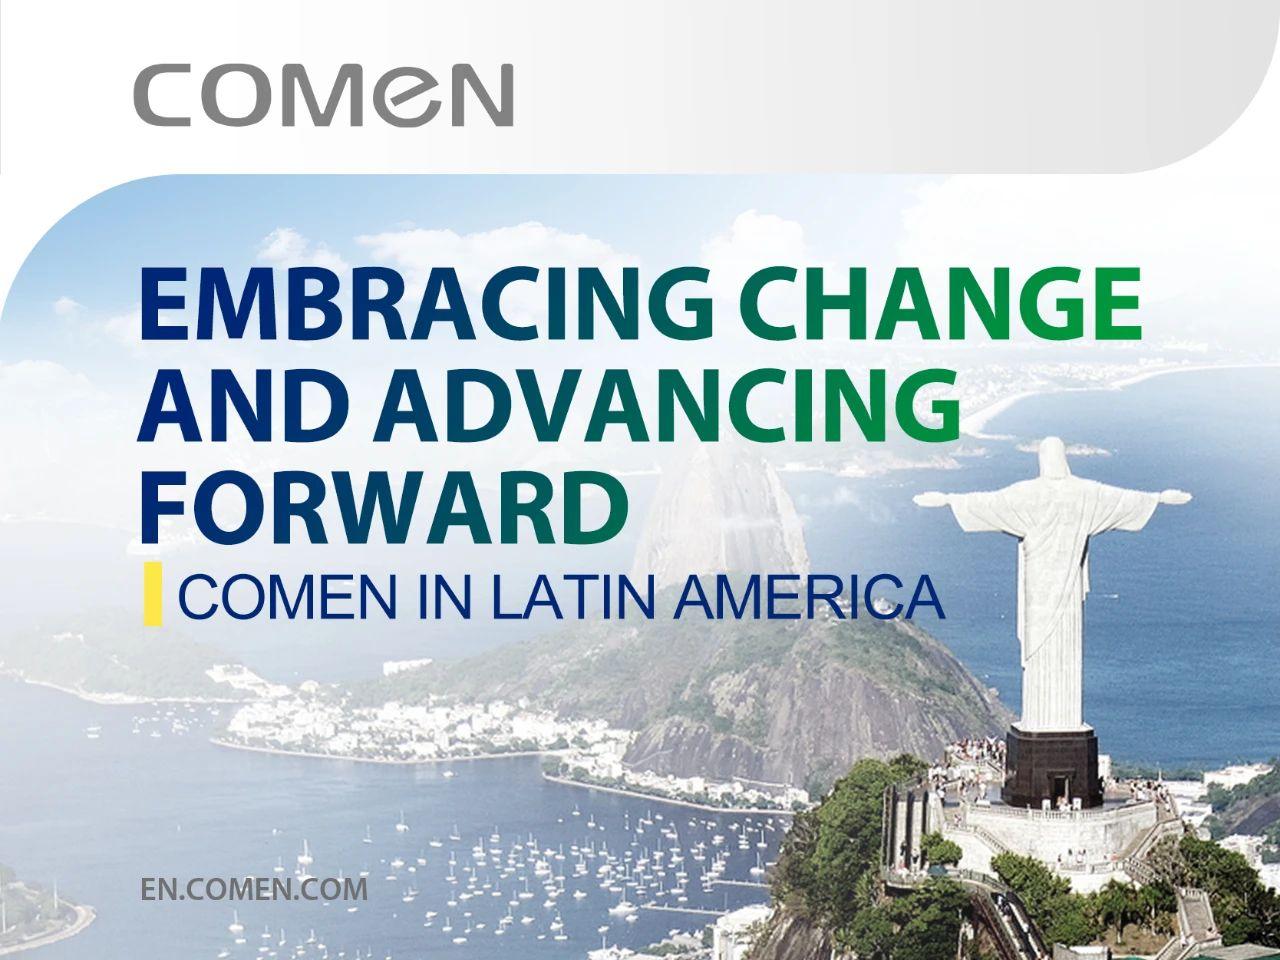 Comen in Latin America | Embracing Change and Advancing Forward